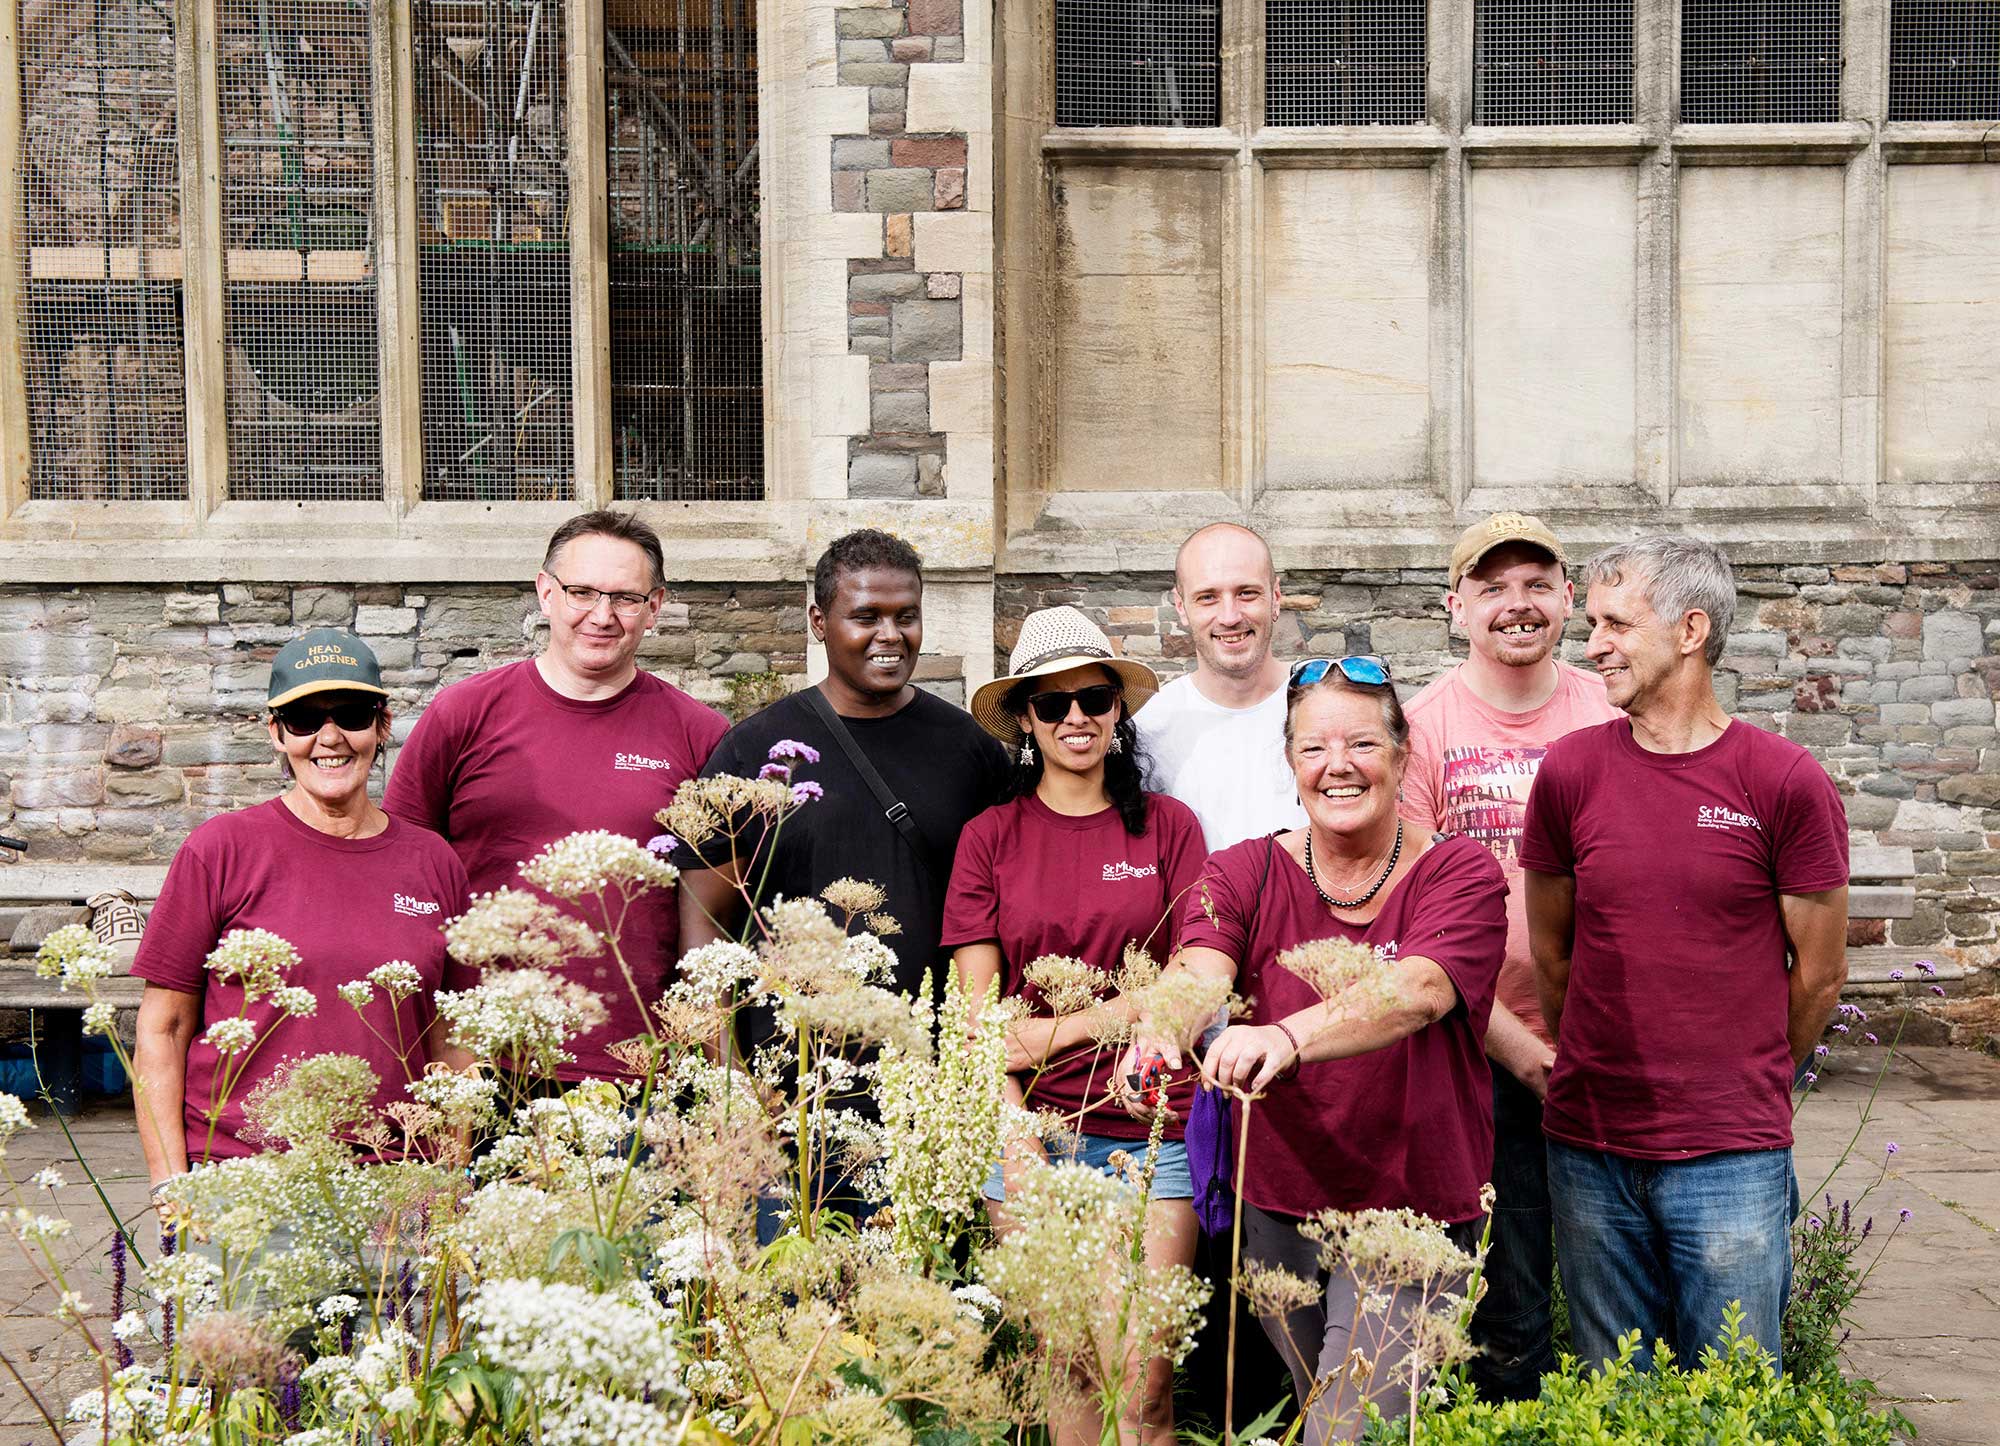 Group of people standing in front of church building with plants in front of them